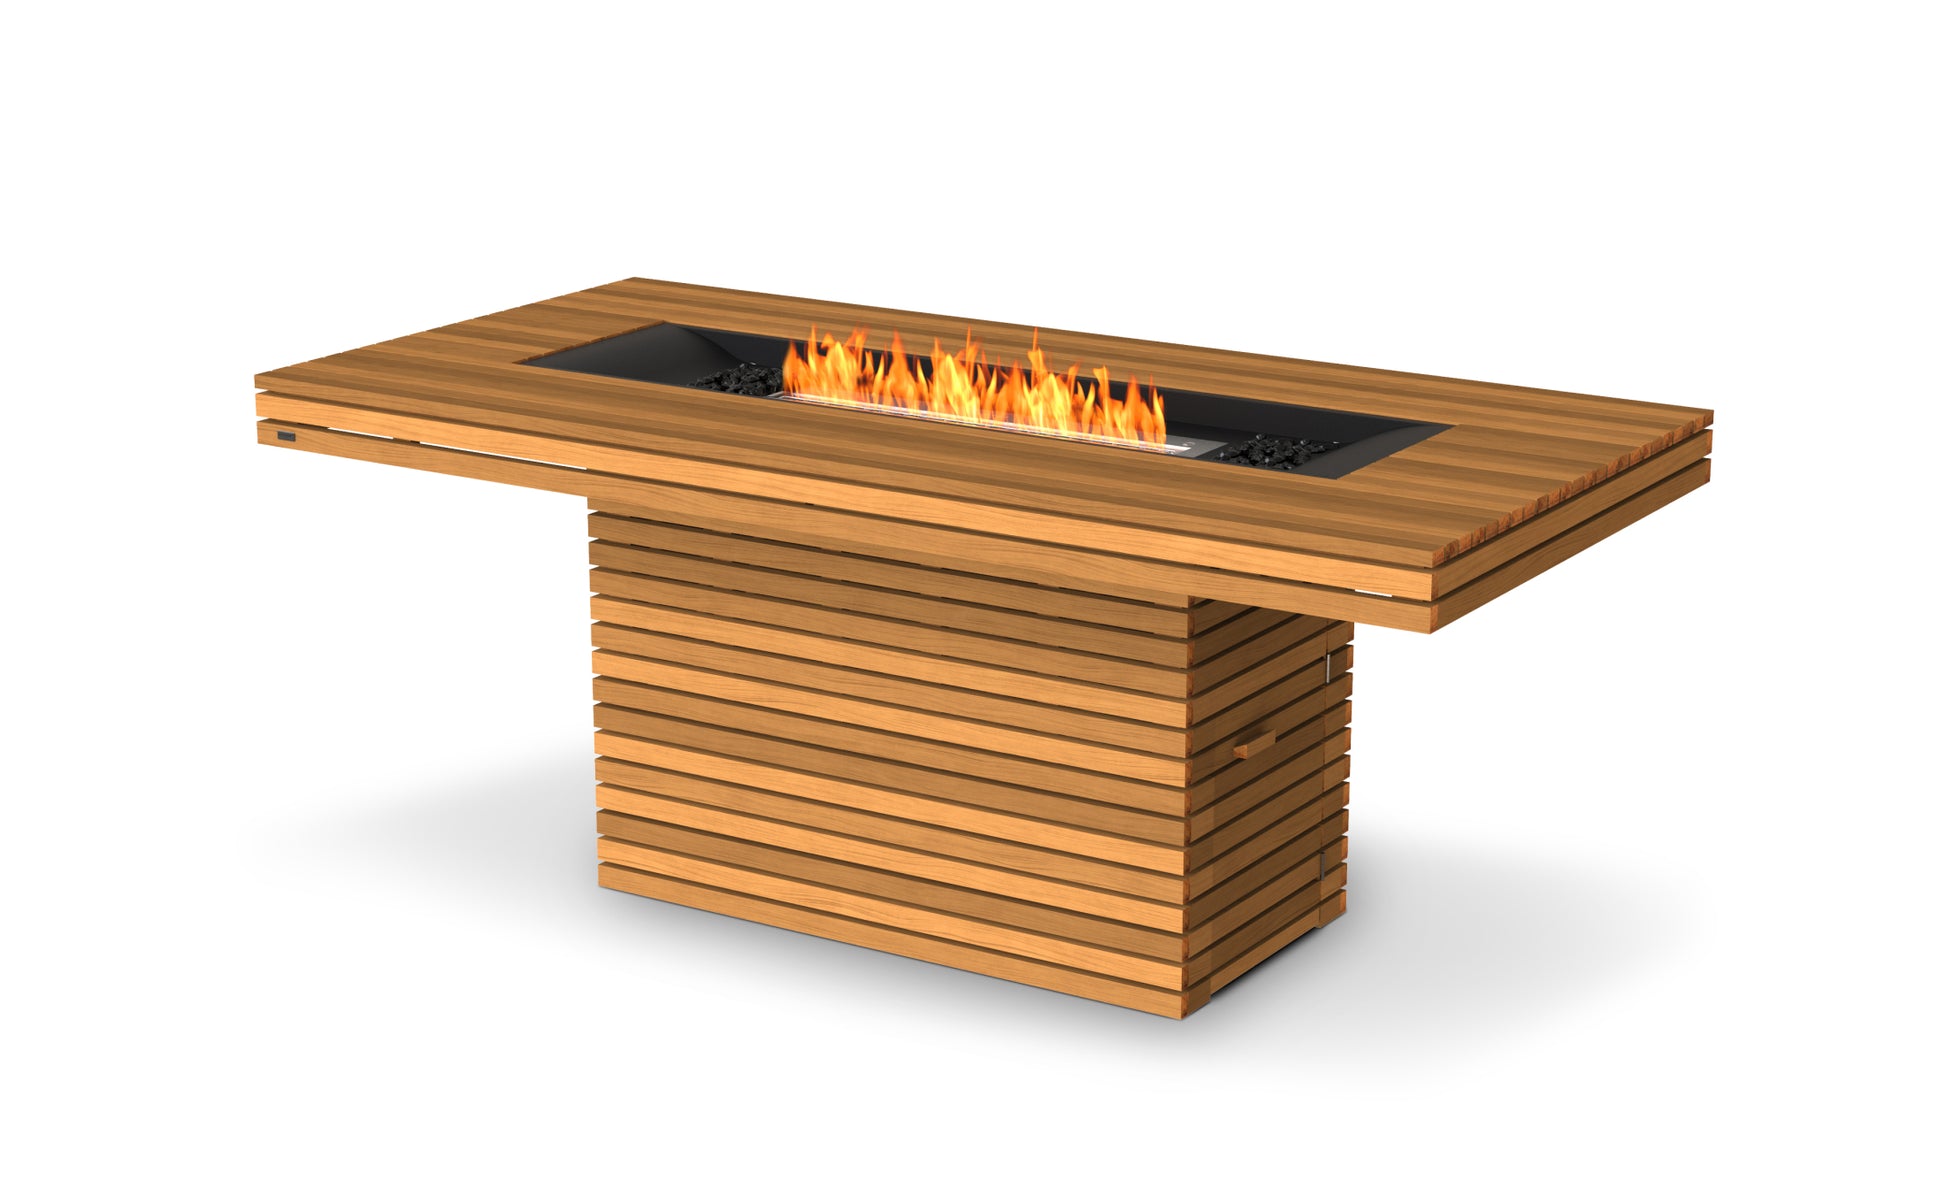 EcoSmart Fire Gin (Bar) Fire Pit Table with Bioethanol Sustainable Fuel - PadioLiving - EcoSmart Fire Gin (Bar) Fire Pit Table with Bioethanol Sustainable Fuel - Fire Pit - PadioLiving